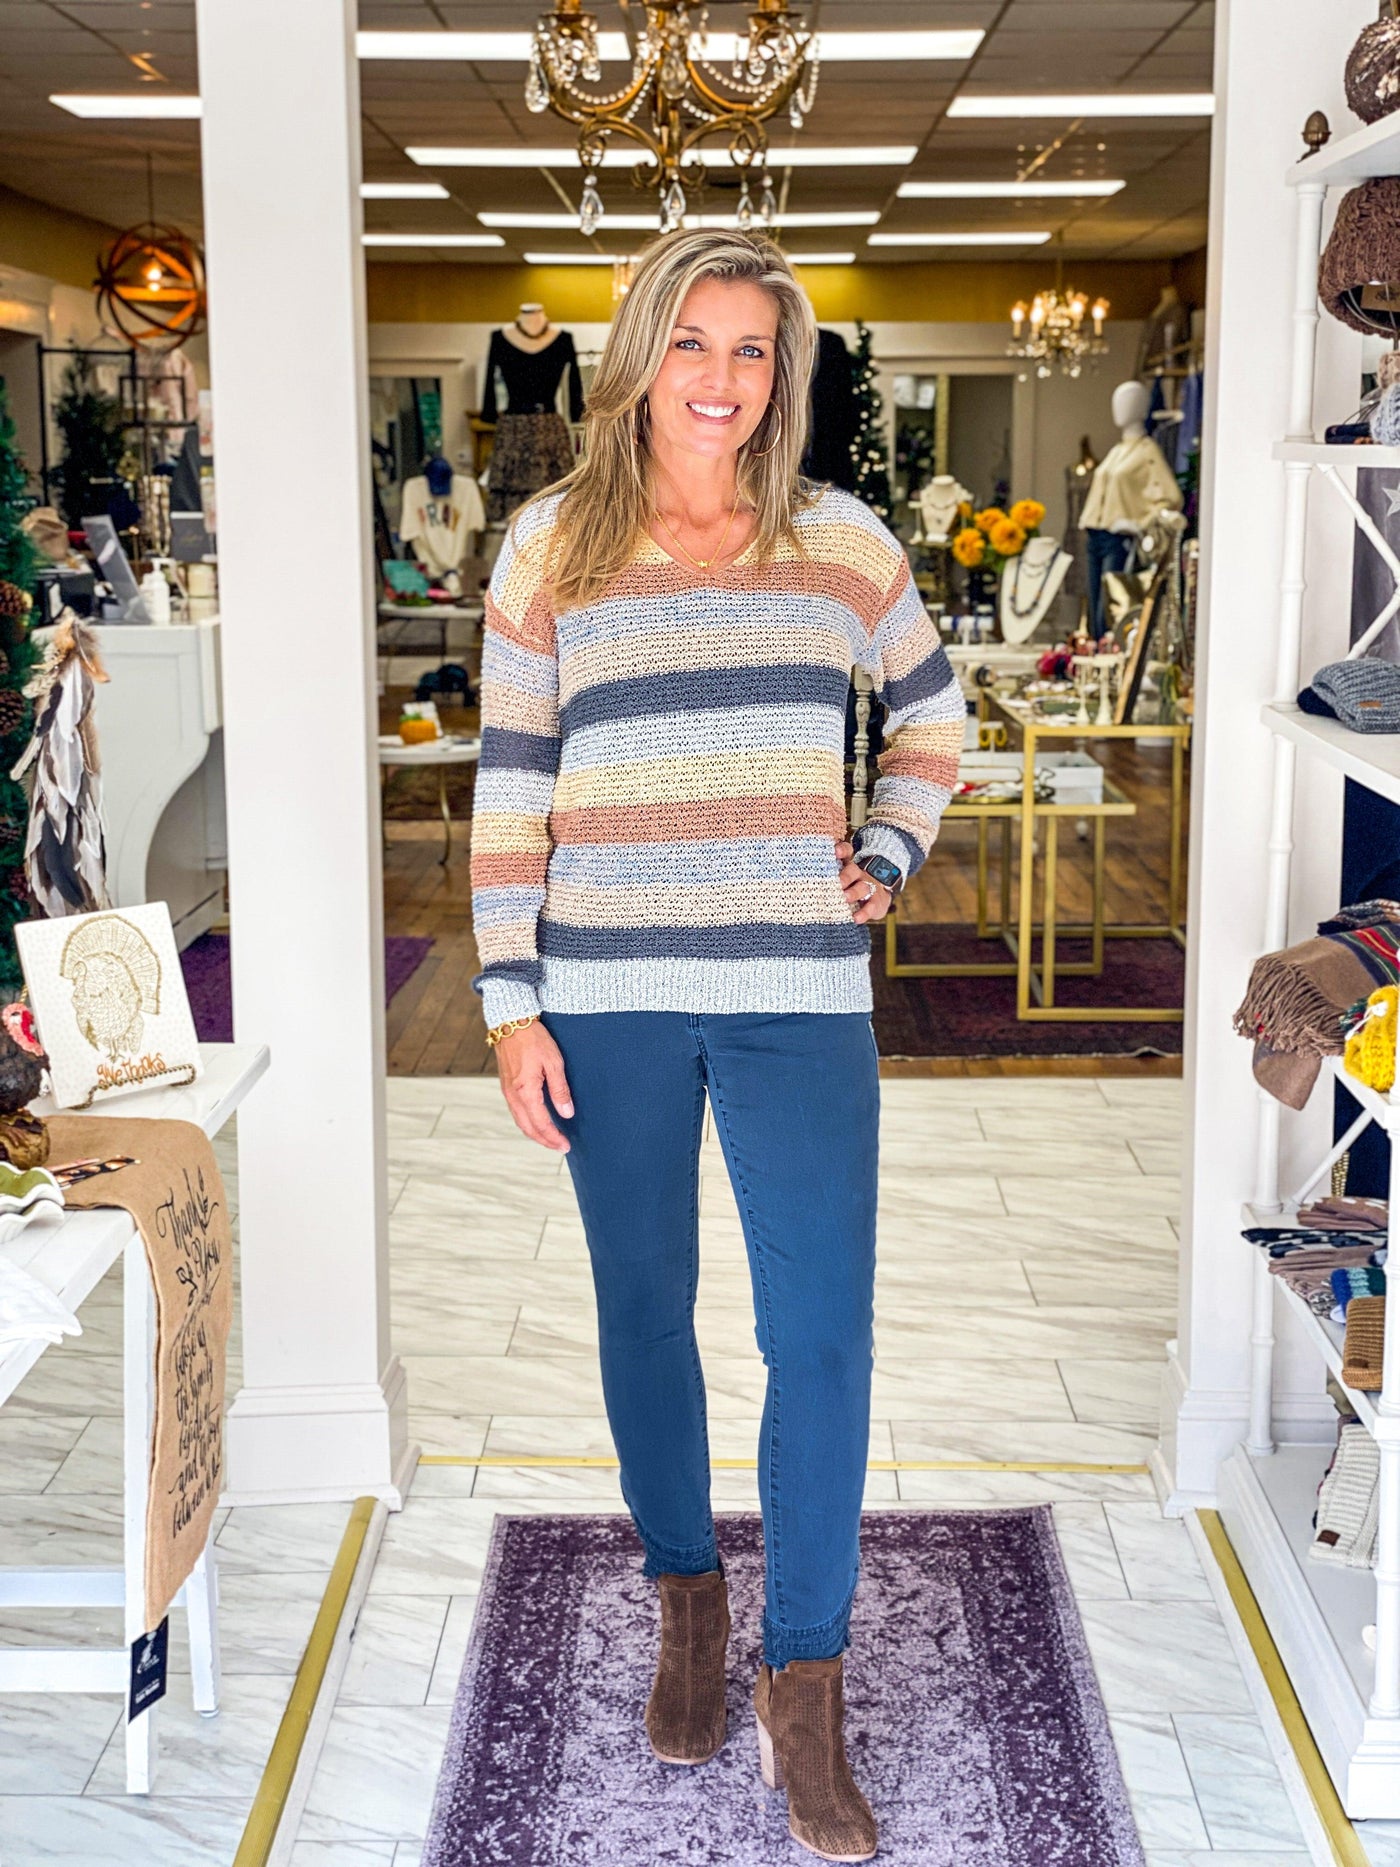 Model wearing fall fashion outfit that features an open-knit striped sweater with v-neck and long sleeves paired with balsam blue colored denim pants with frayed edge hem details from Charlie B.